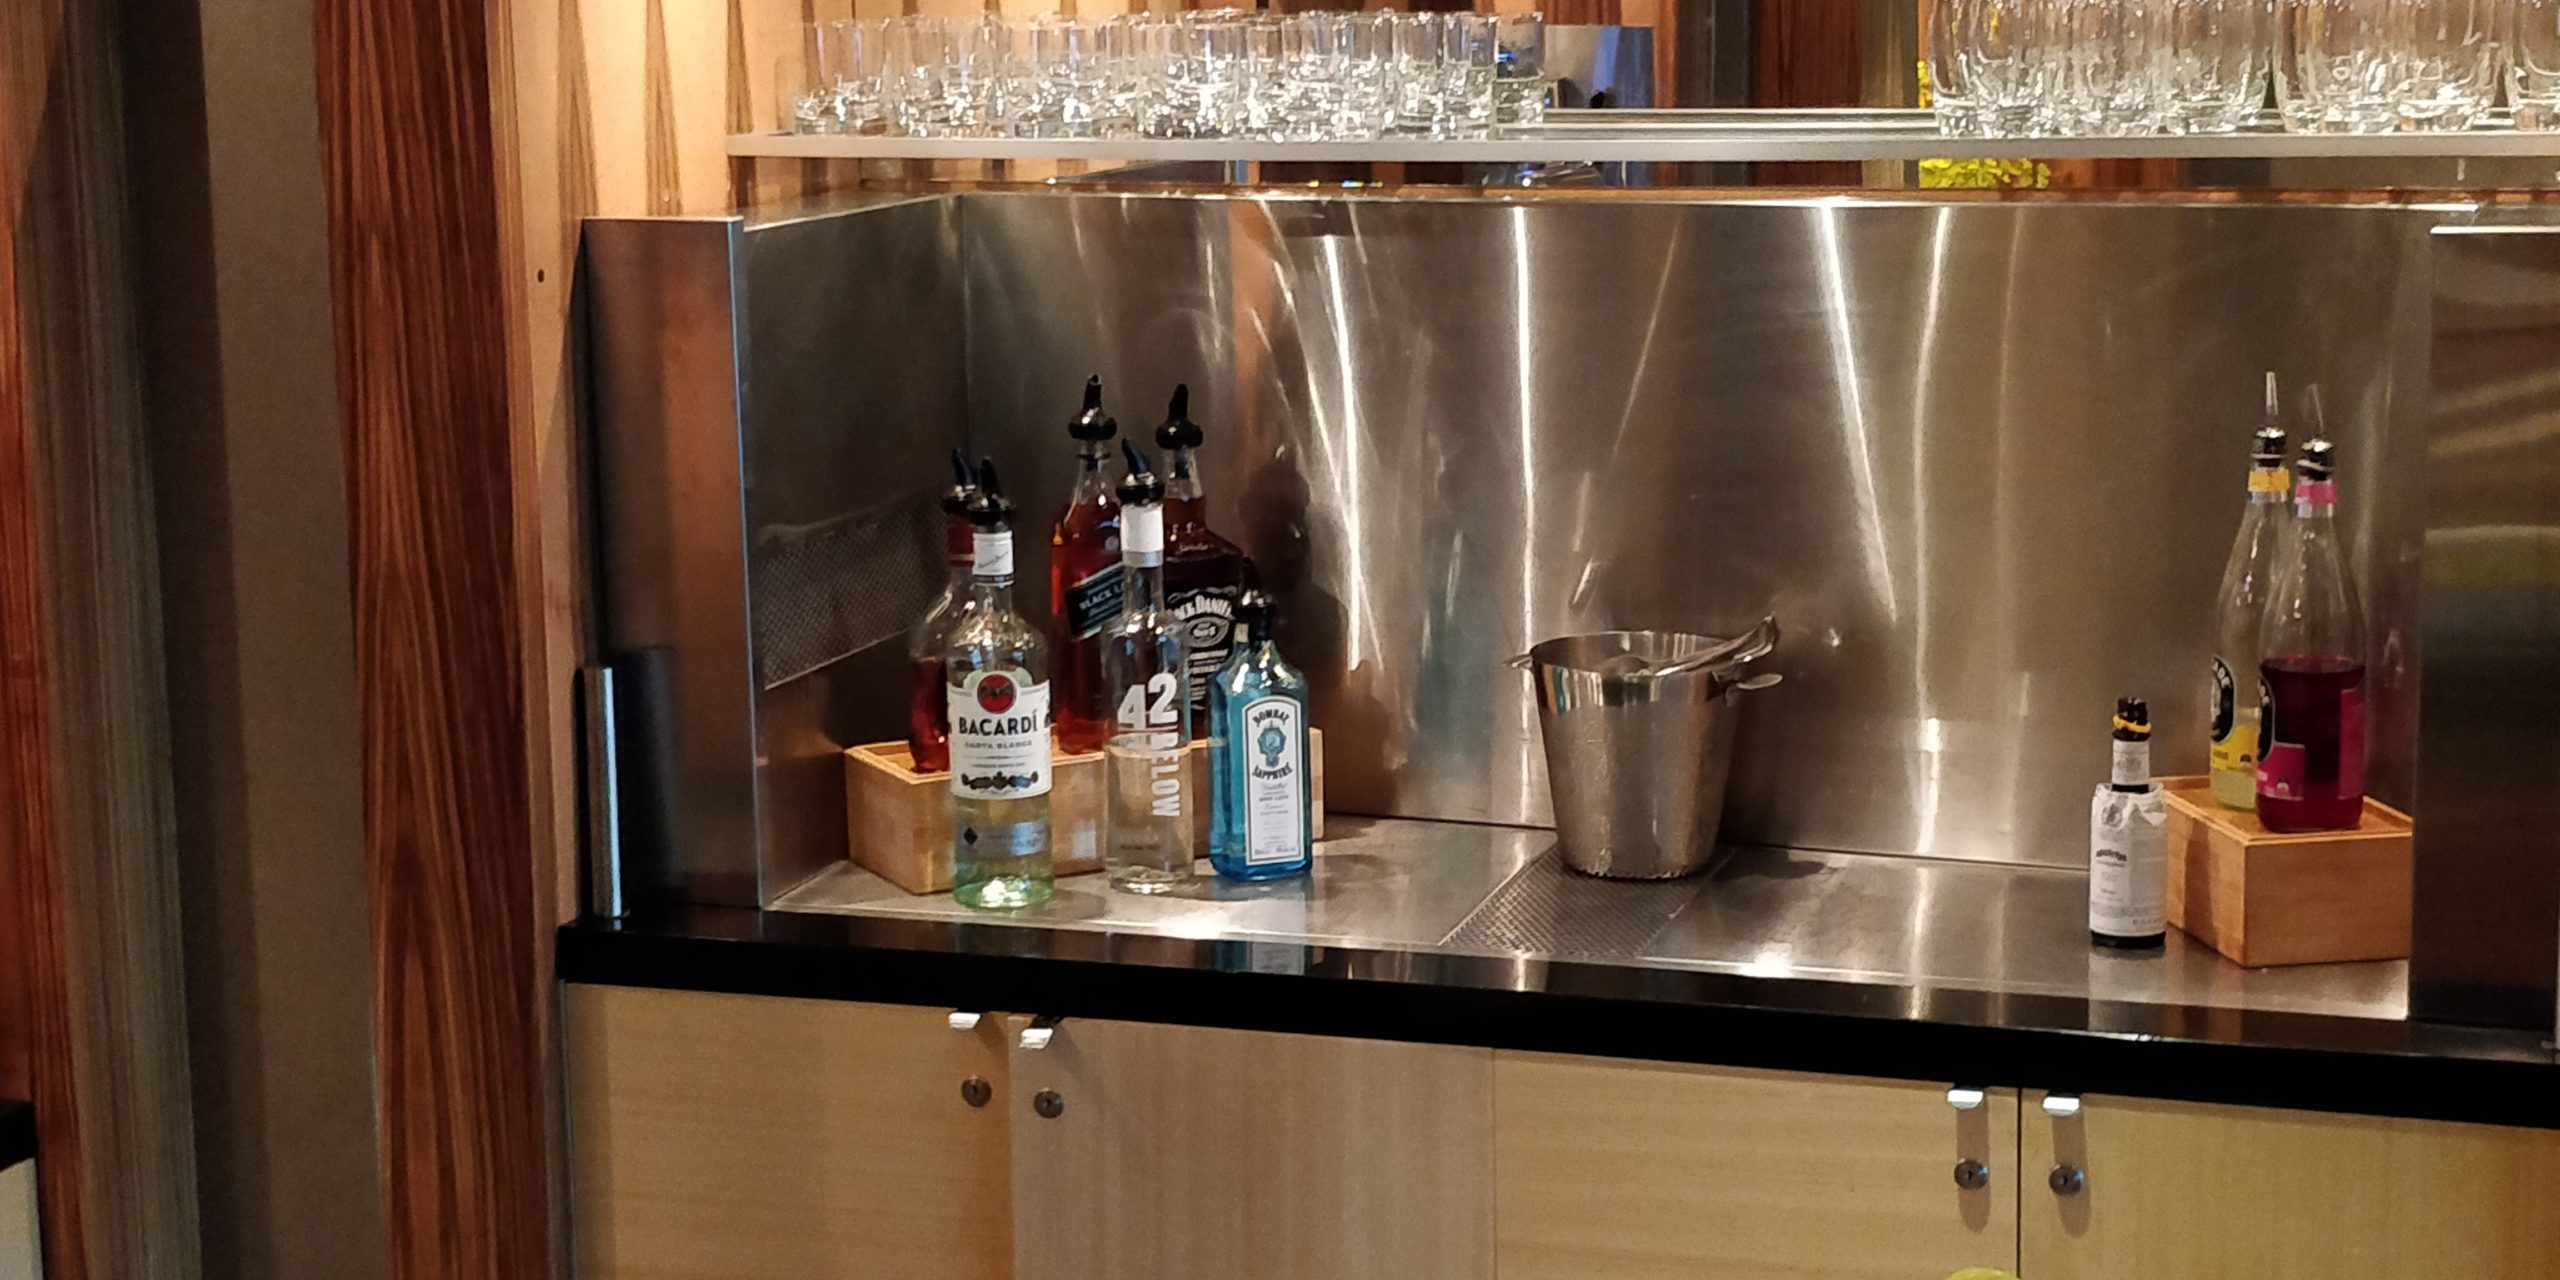 PICTURE OF THE LIQUOR BAR